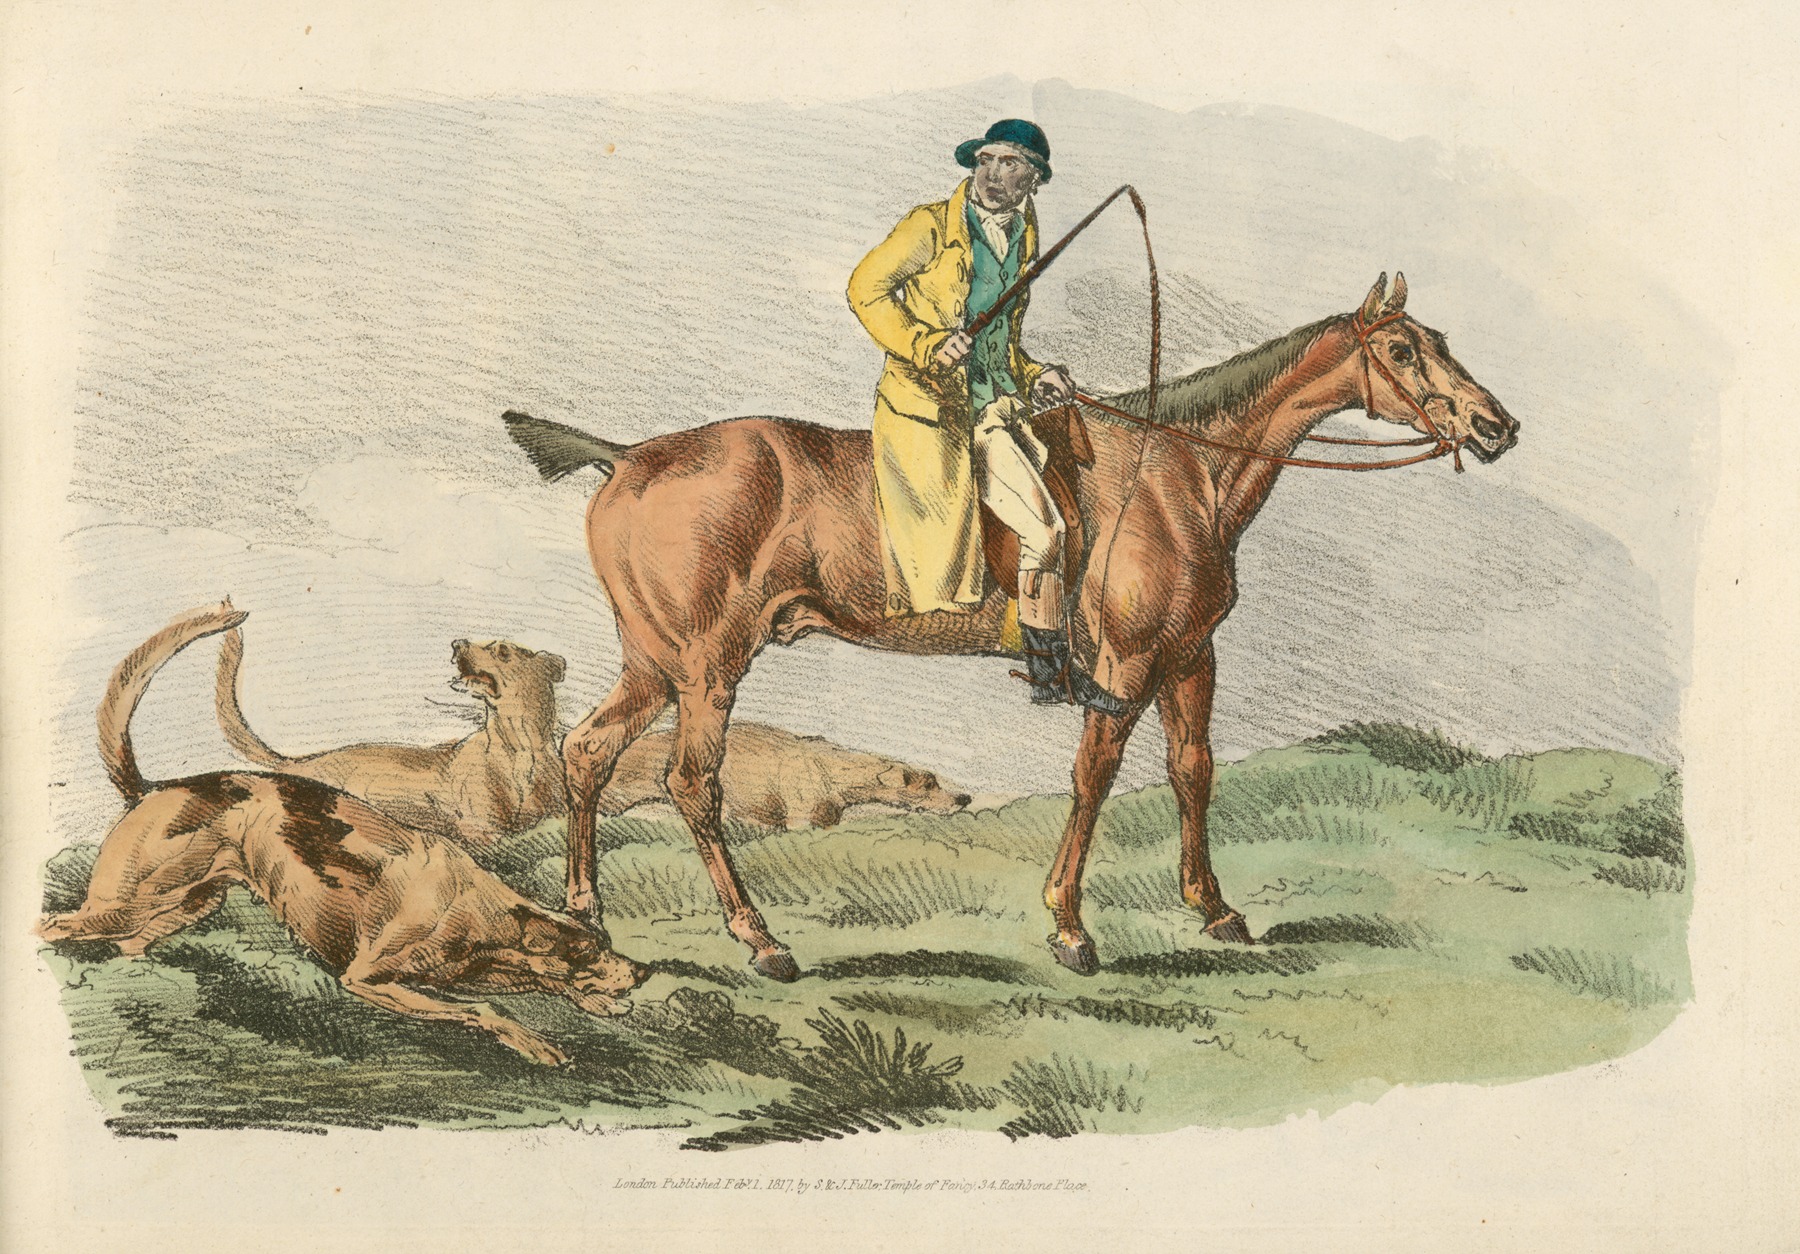 Henry Thomas Alken - Mounted hunter with three hounds running behind